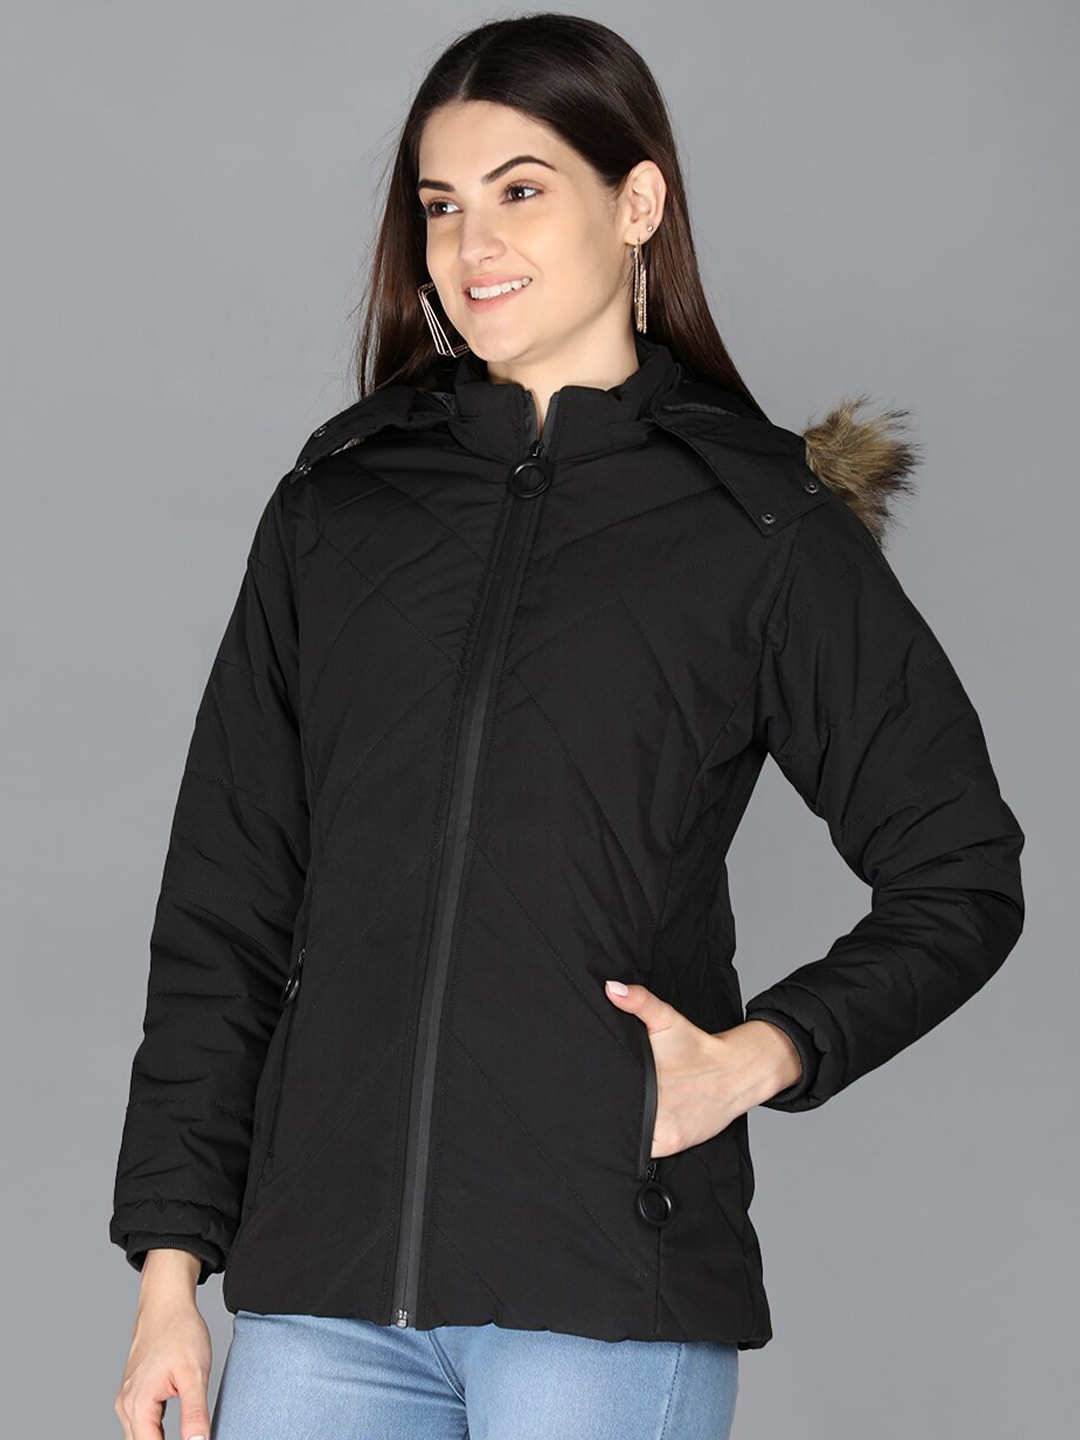 PROTEX Women Black Outdoor Parka Jacket Price in India